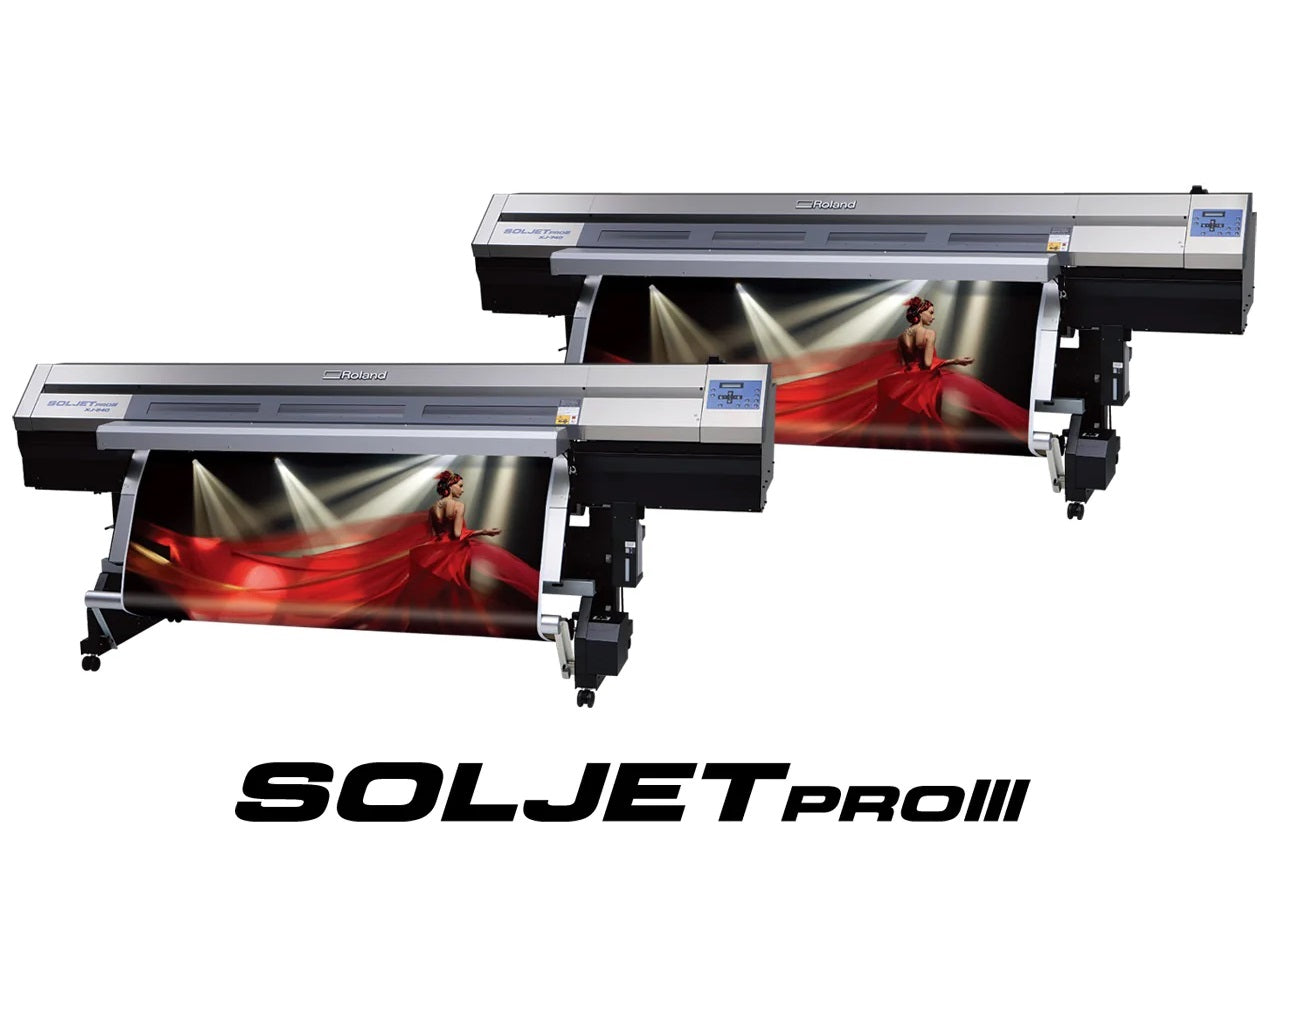 Roland Soljet Pro III: The Ultimate Guide